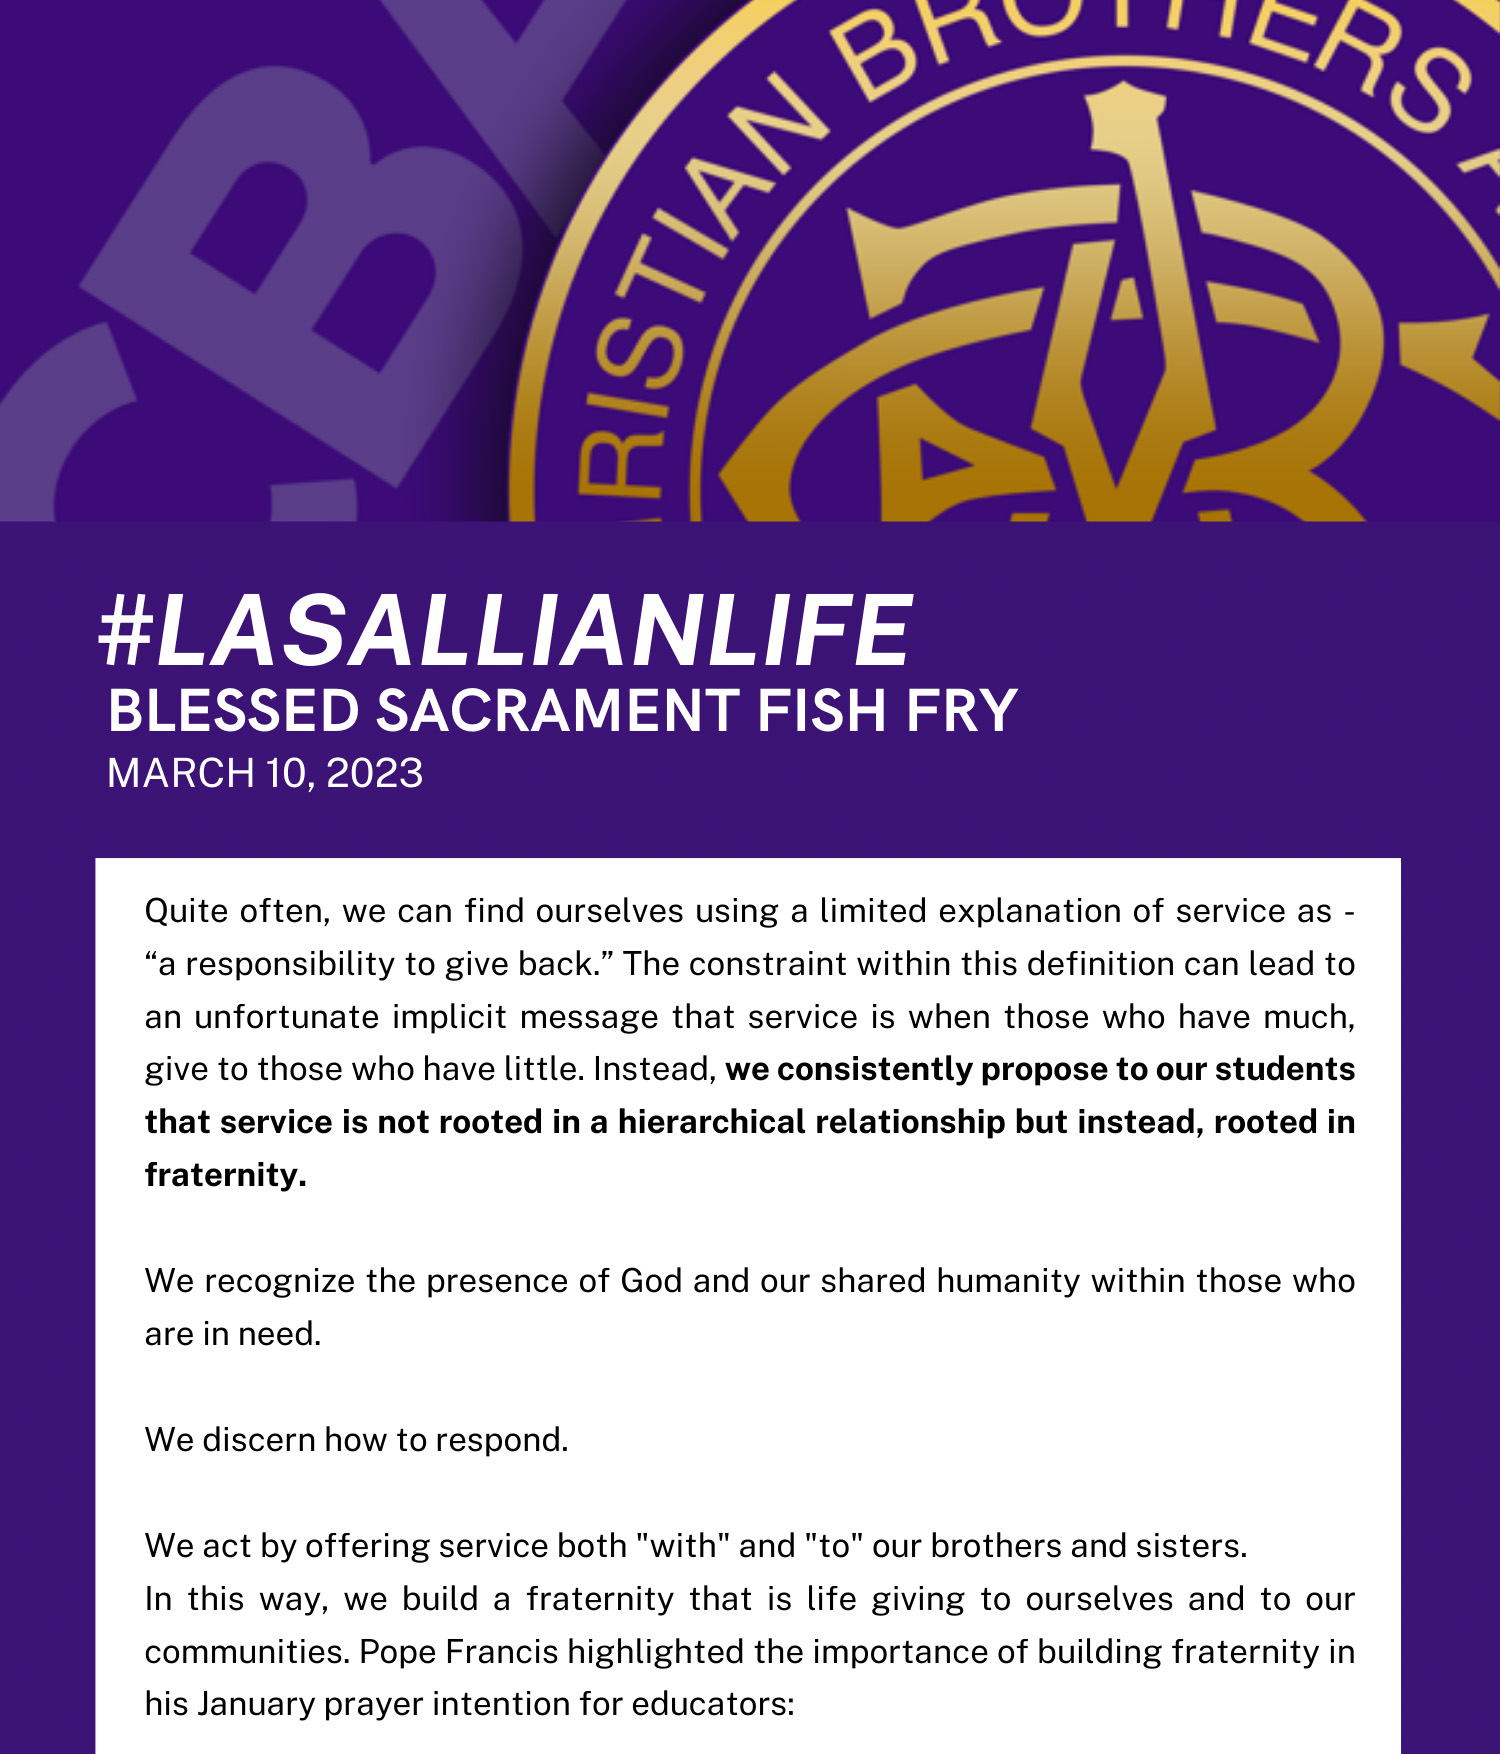 #LasallianLife : Blessed Sacrament Fish Fry - March 10, 2022 - Christian Brothers Academy in Syracuse, NY